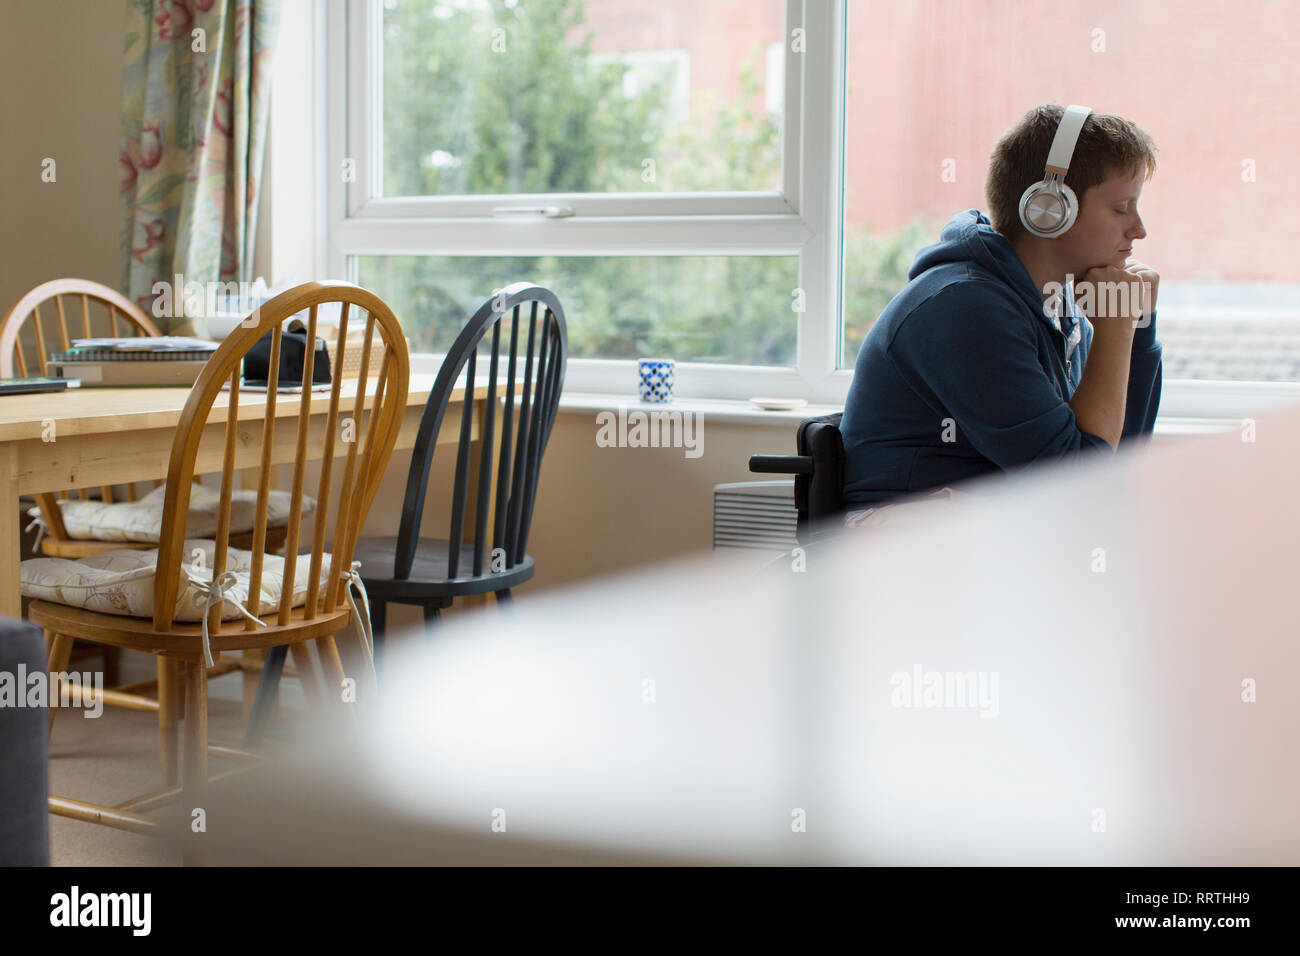 Serene young woman in wheelchair listening to music with headphones at window Stock Photo